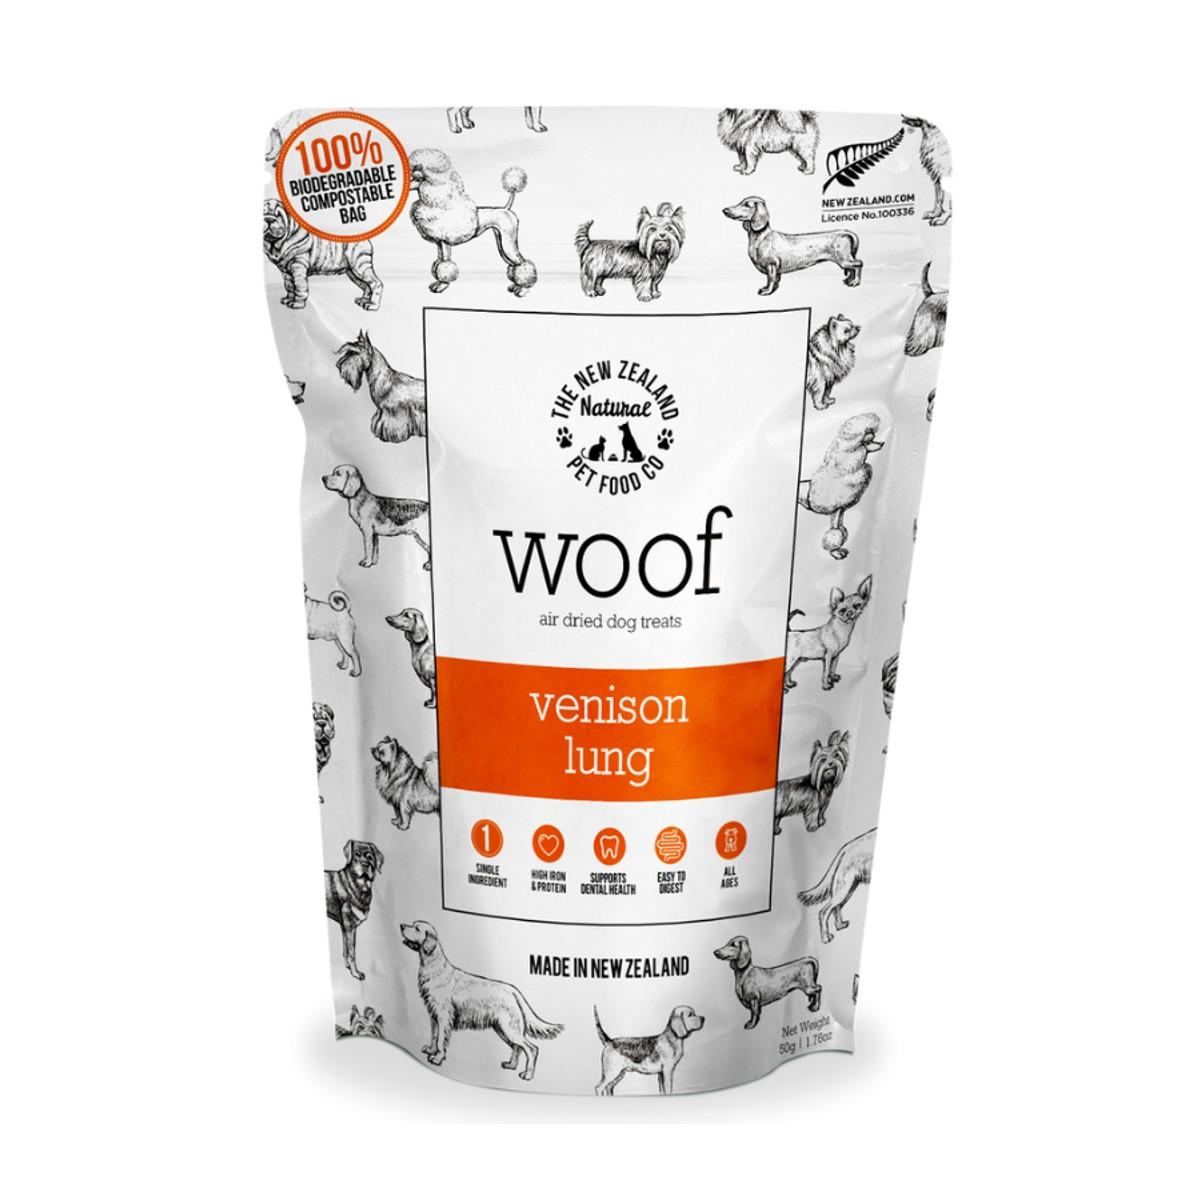 The New Zealand Natural Pet Food Co. Woof Air Dried Dog Treats - Venison Lung